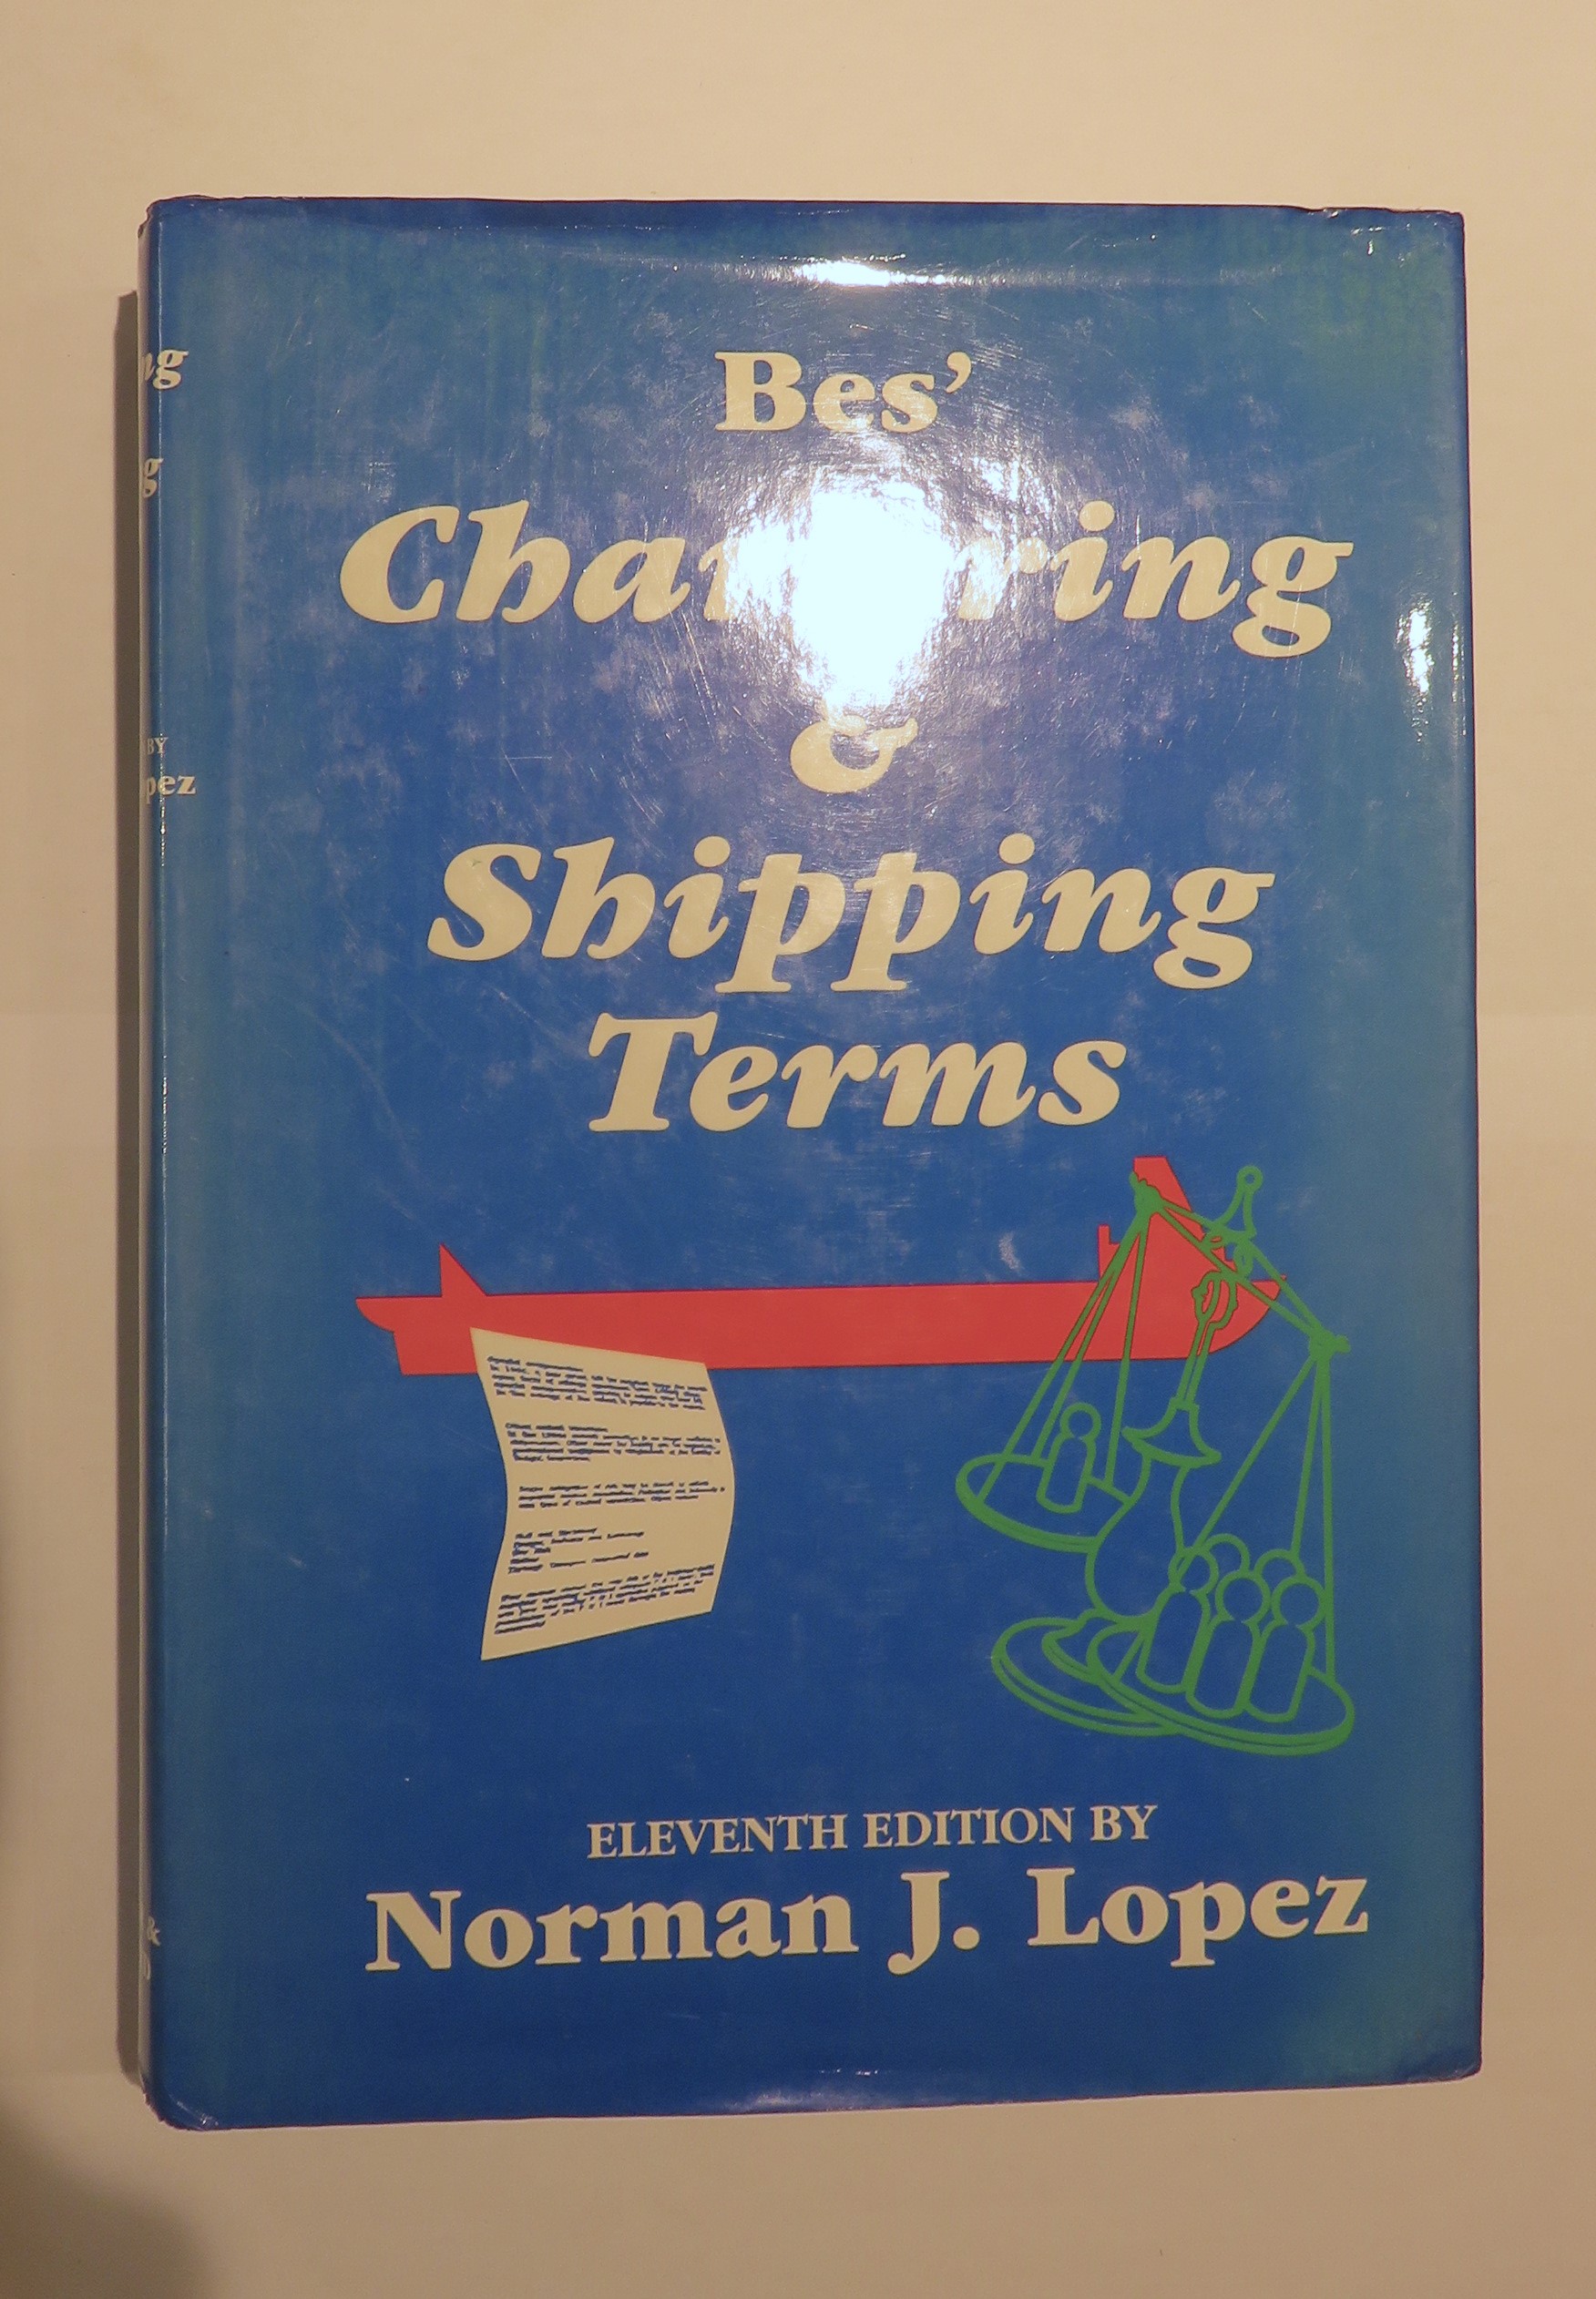 Bes' Chartering & Shipping Terms 